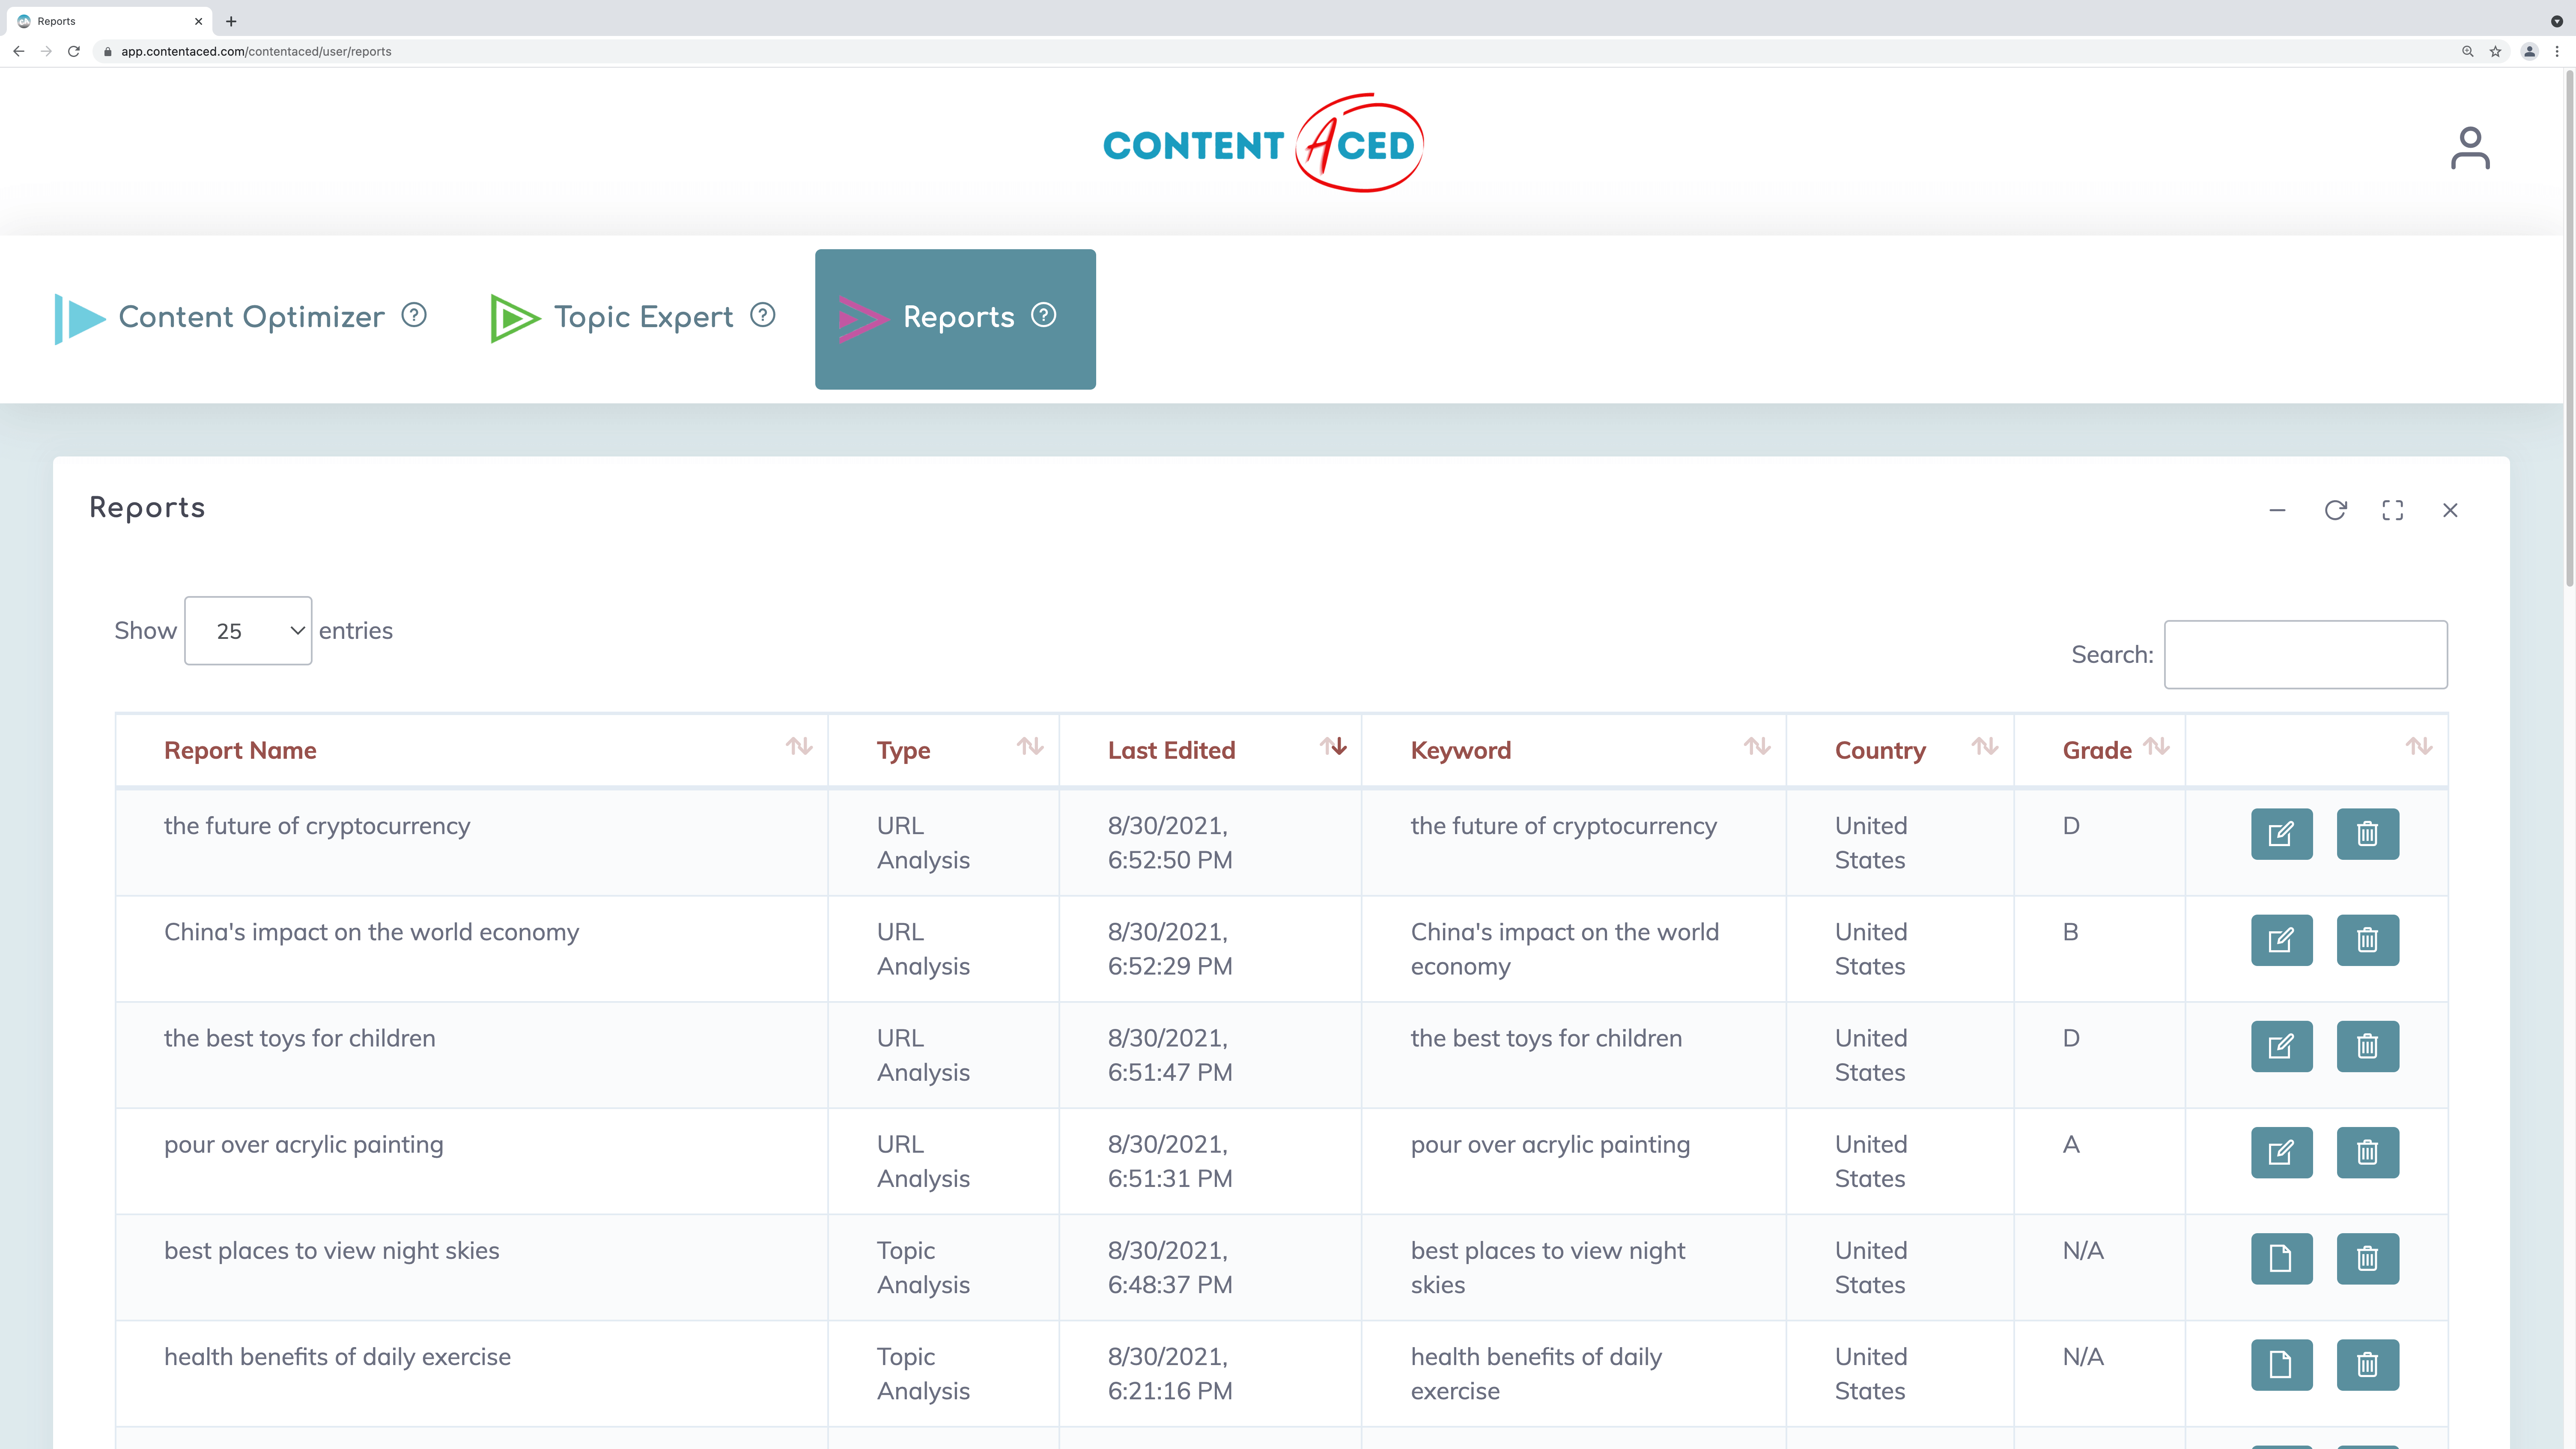 ContentAced : Reports